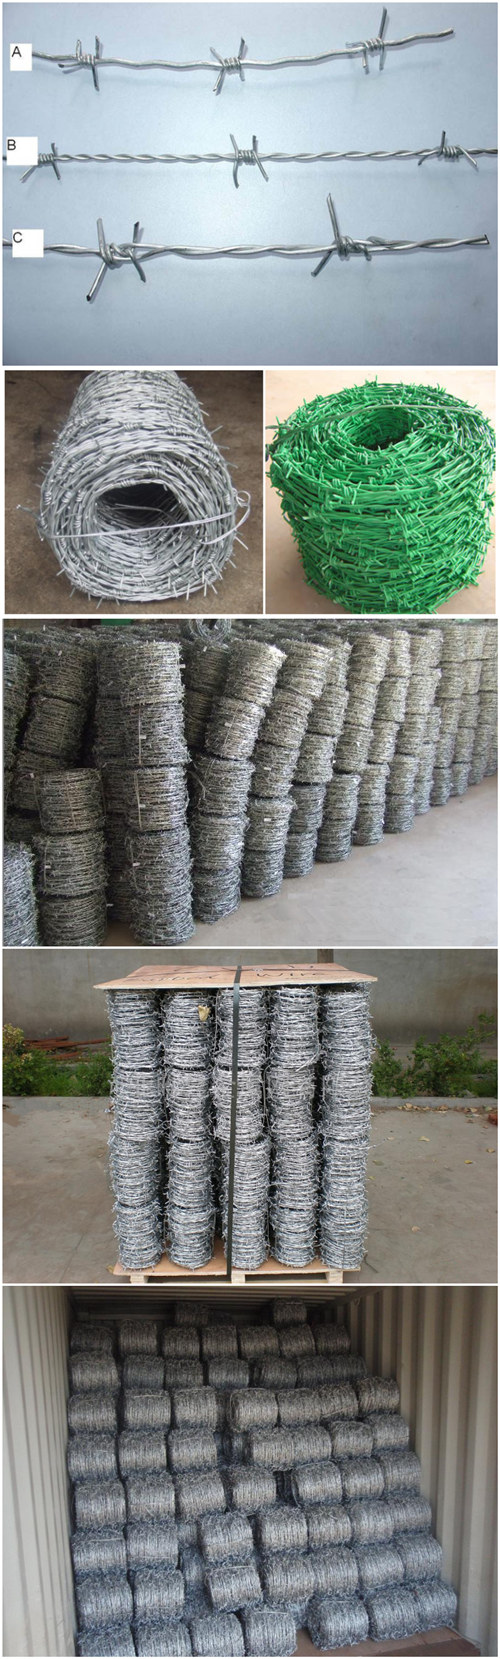 Made in China Barbed Wire Fence for Sale (ZDBWF)